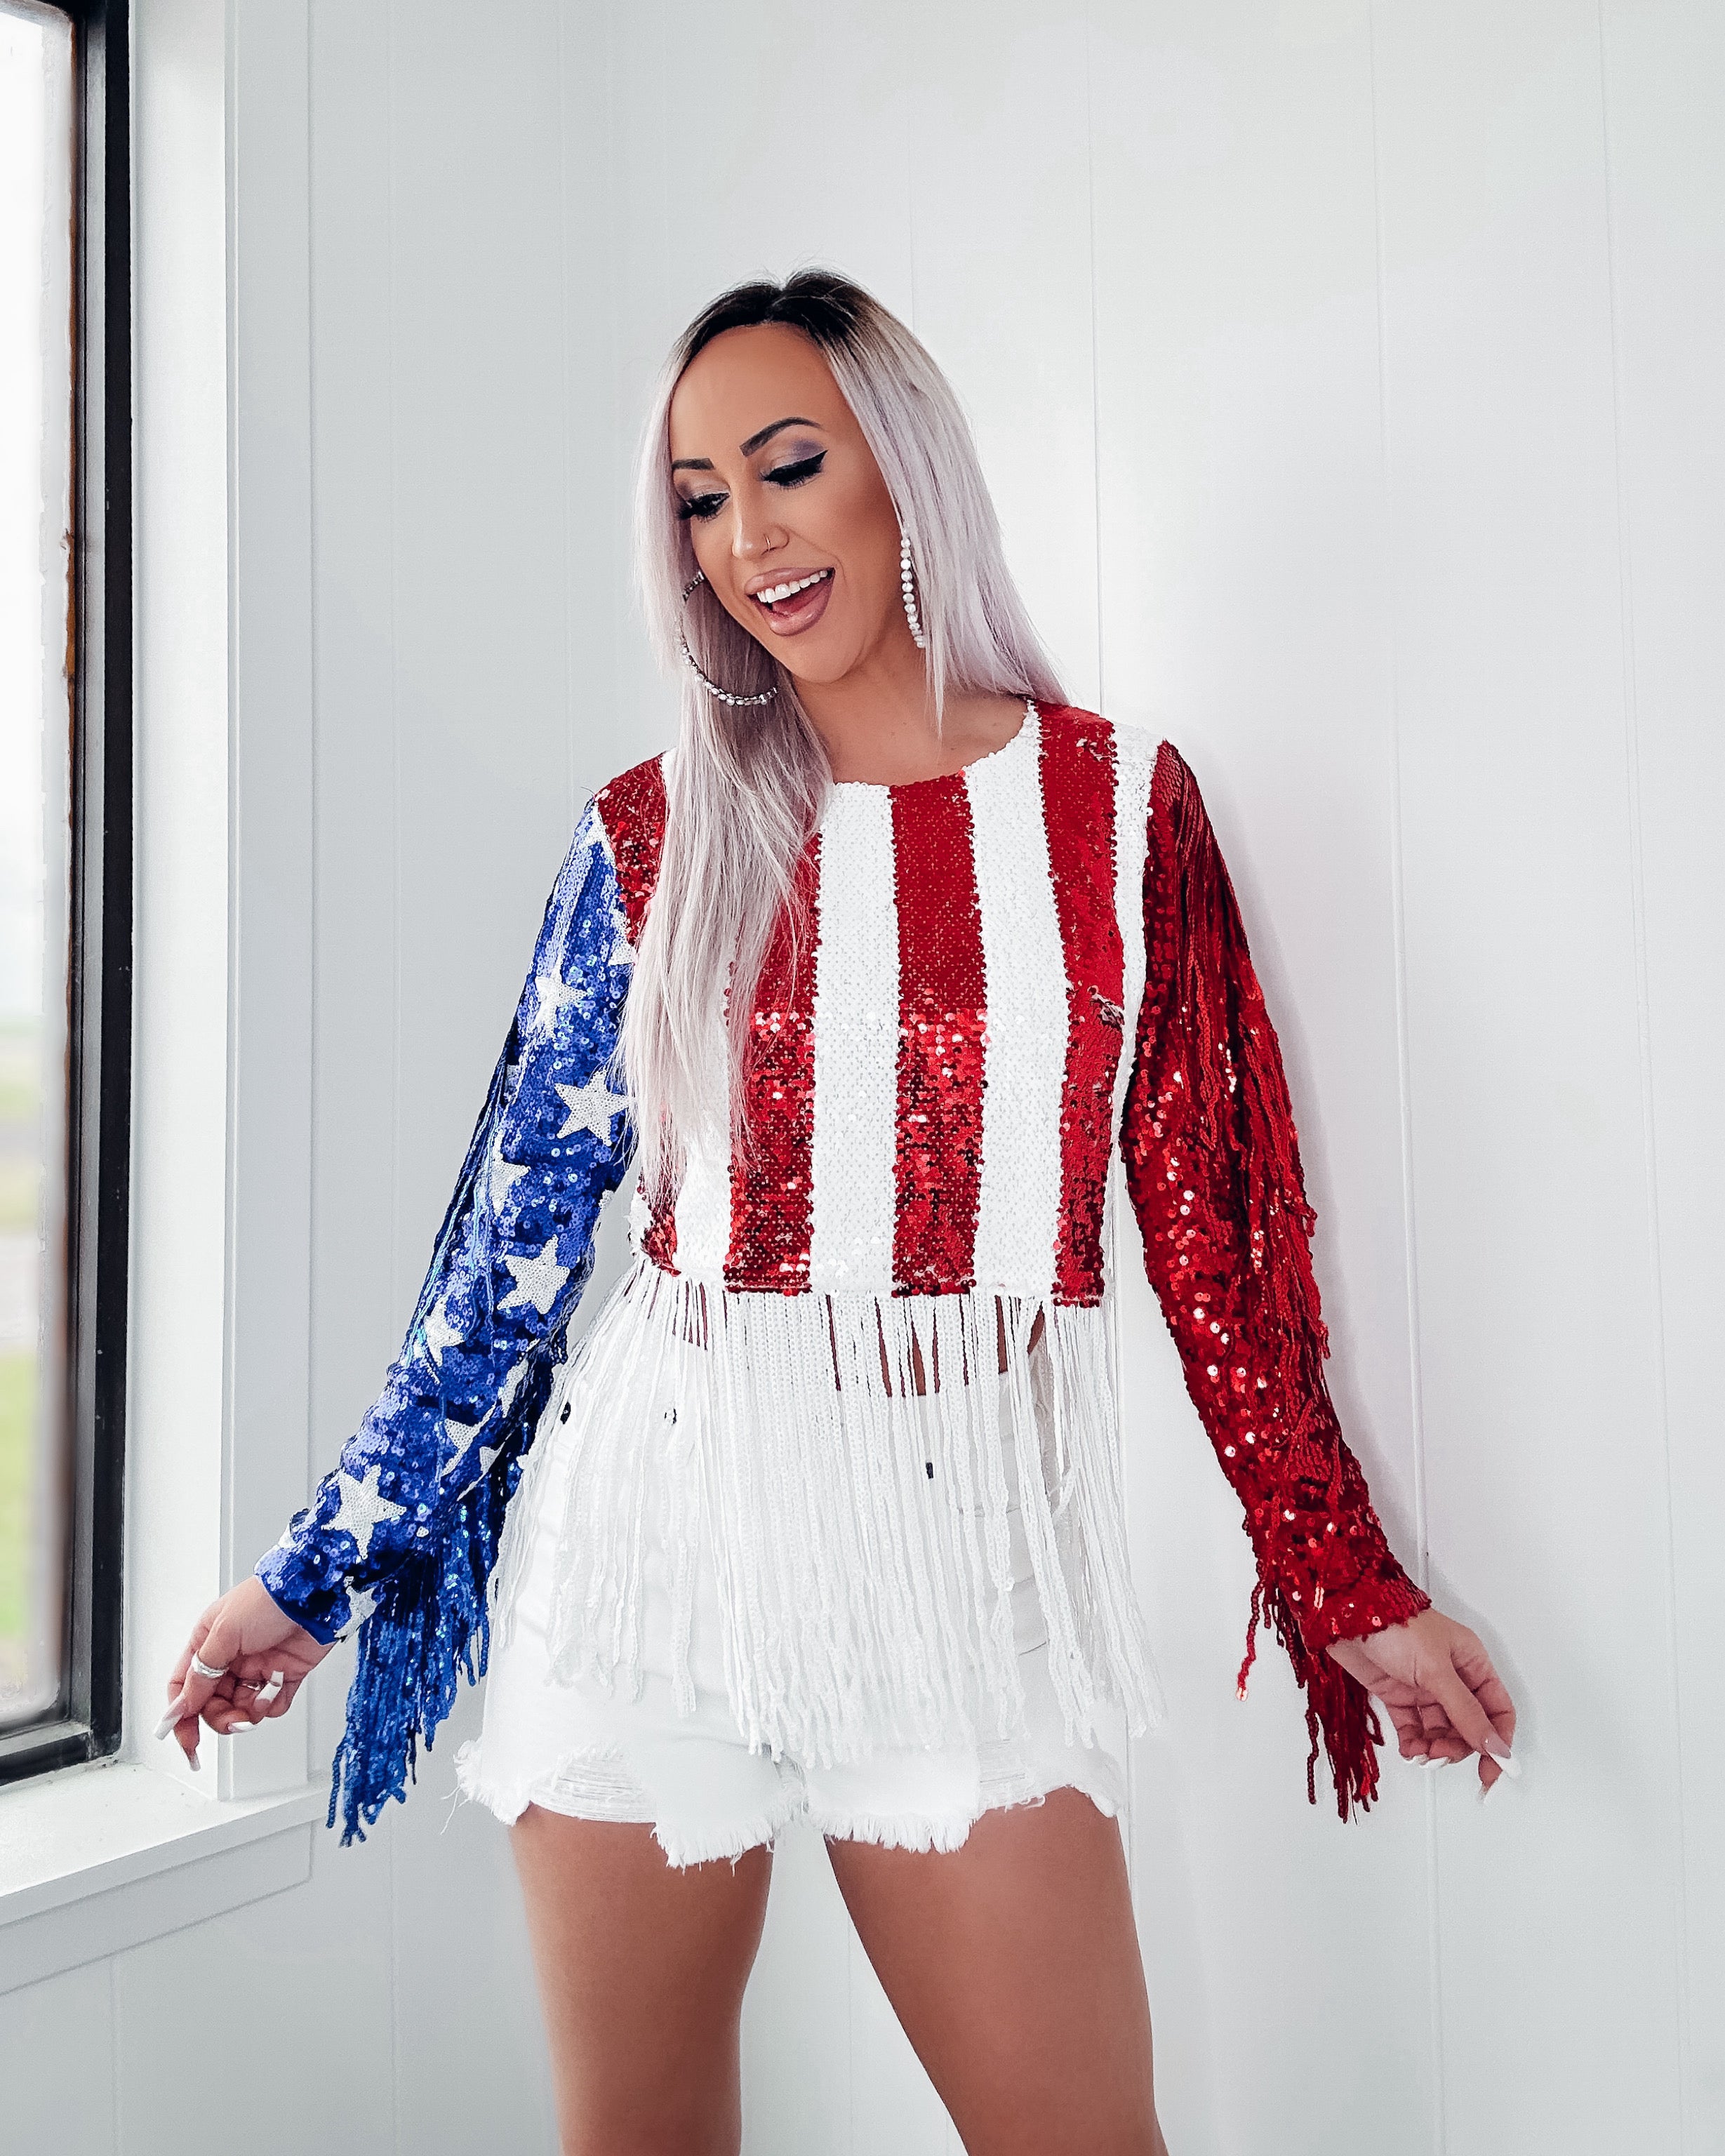 American Fringe Sequin Crop Top - Red/White/Blue